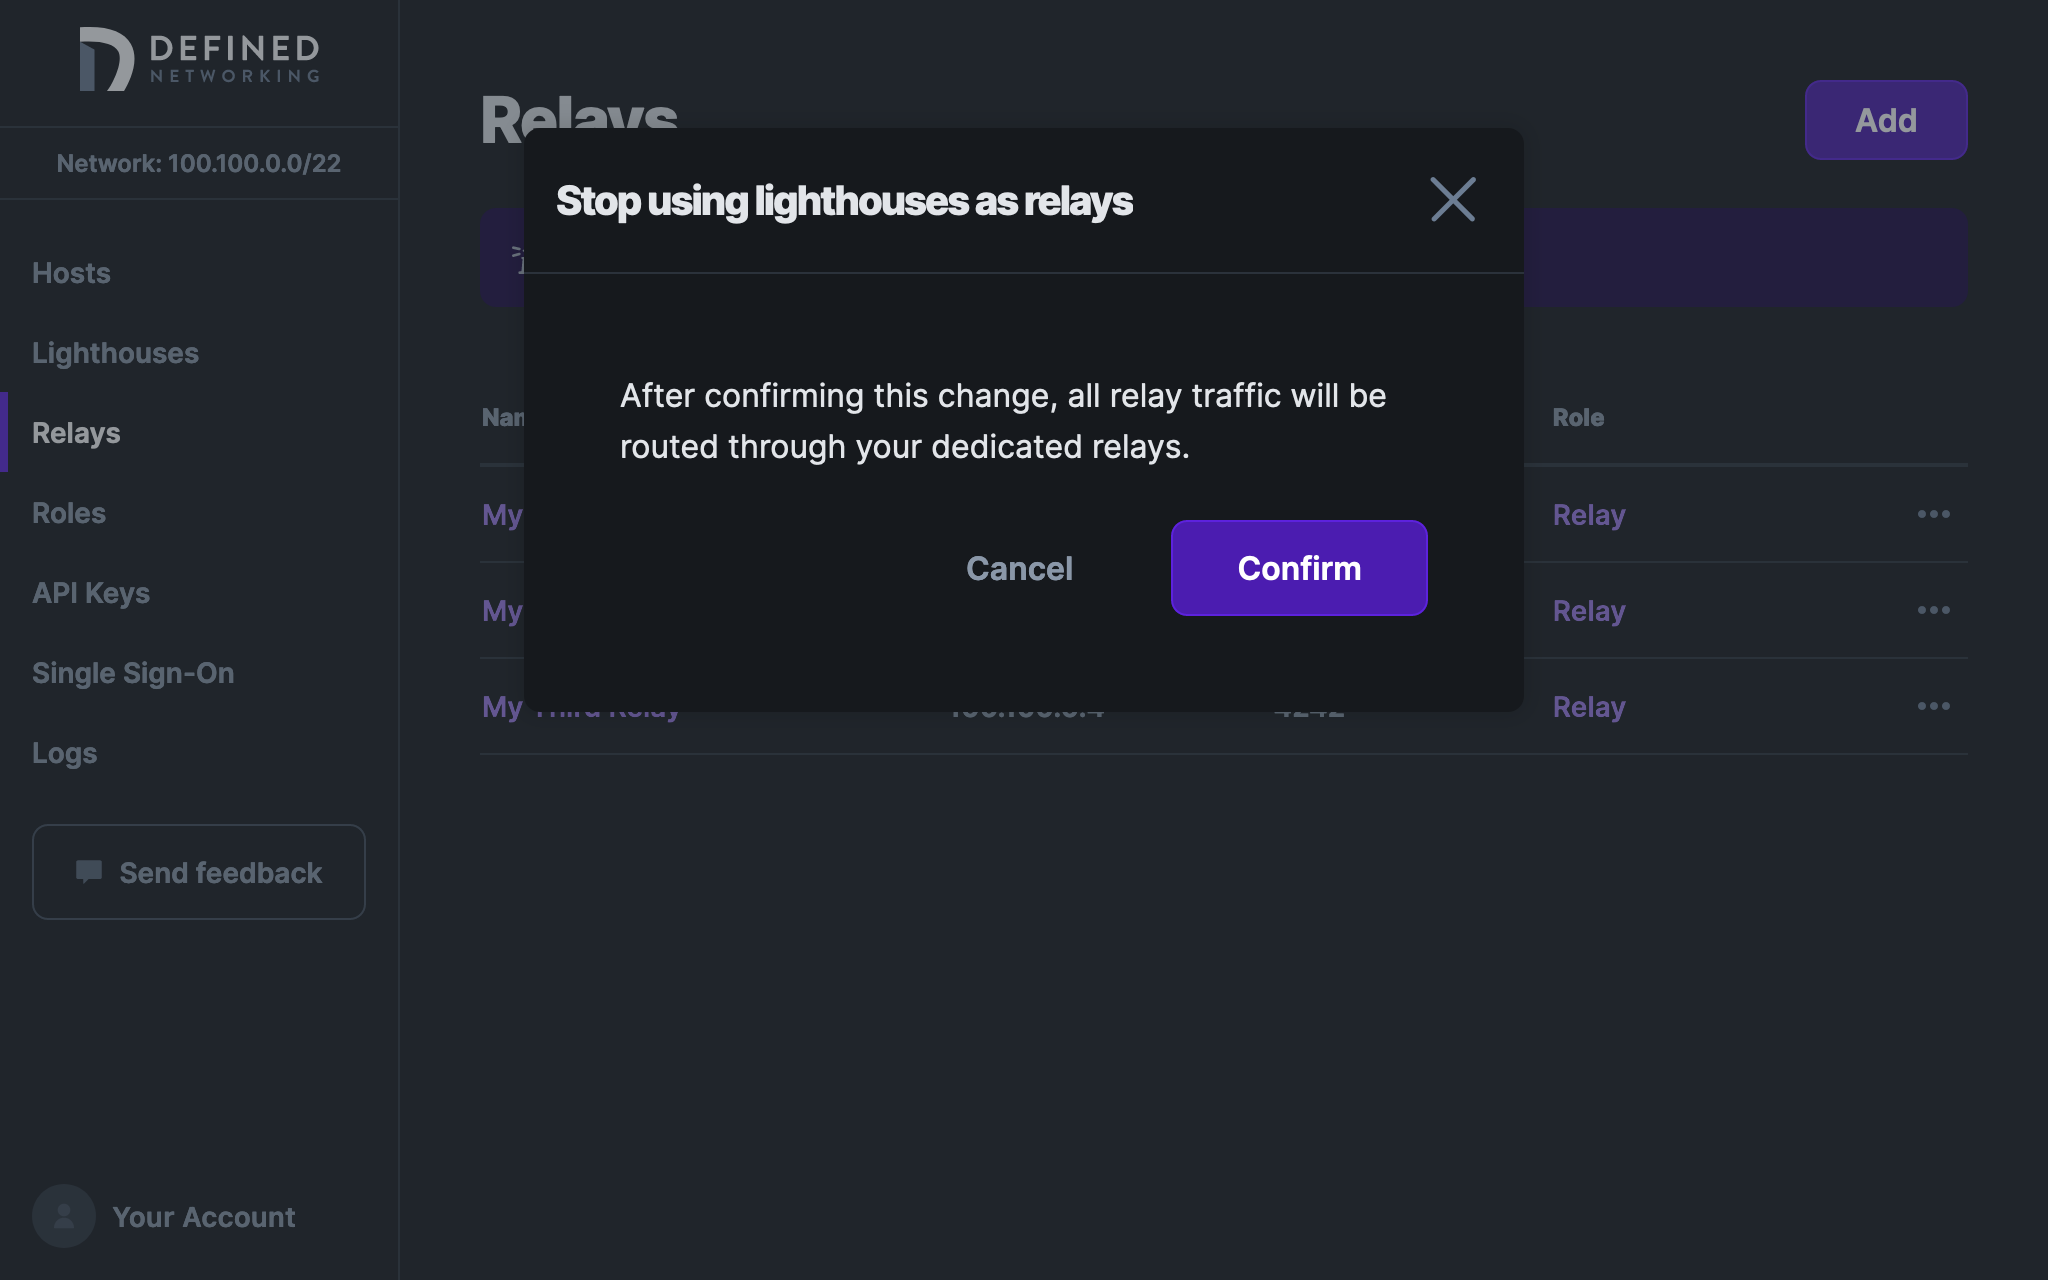 Modal titled 'Stop using lighthouses as relays', with subtext 'After confirming this change, all relay traffic will be routed through your dedicated relays.'